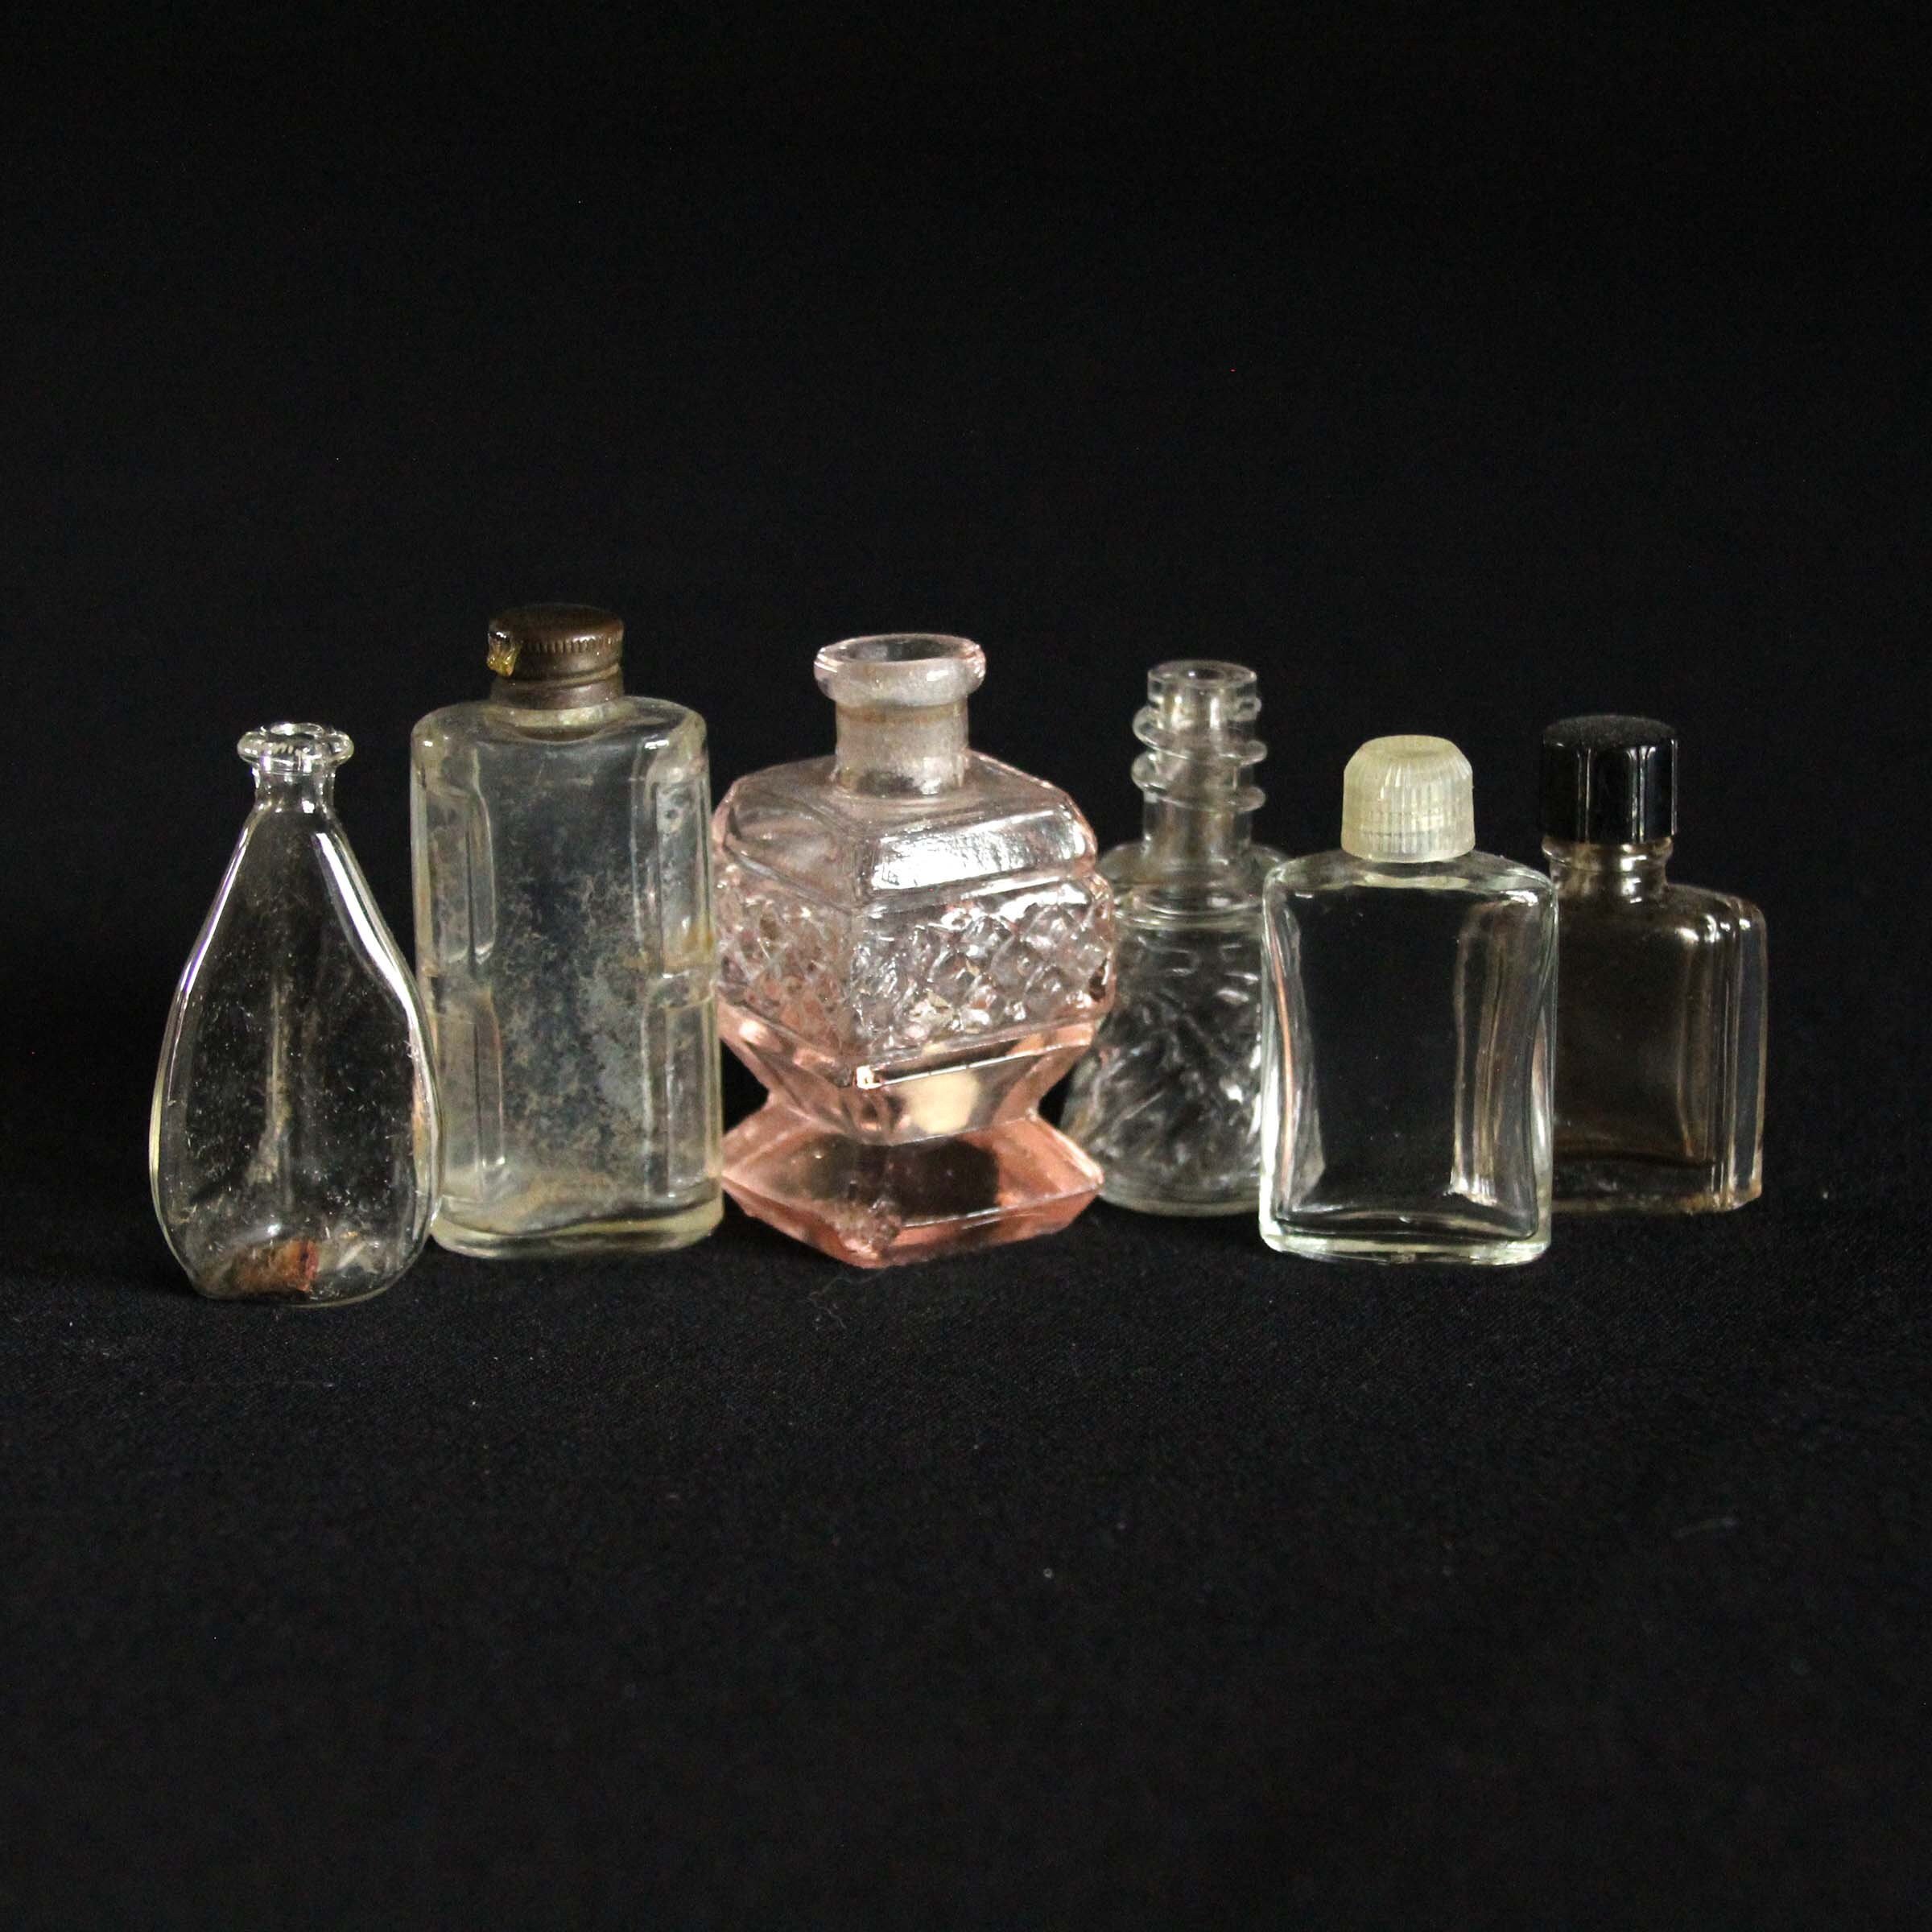 Pin on Vanity, Perfume and Shaving Collectibles